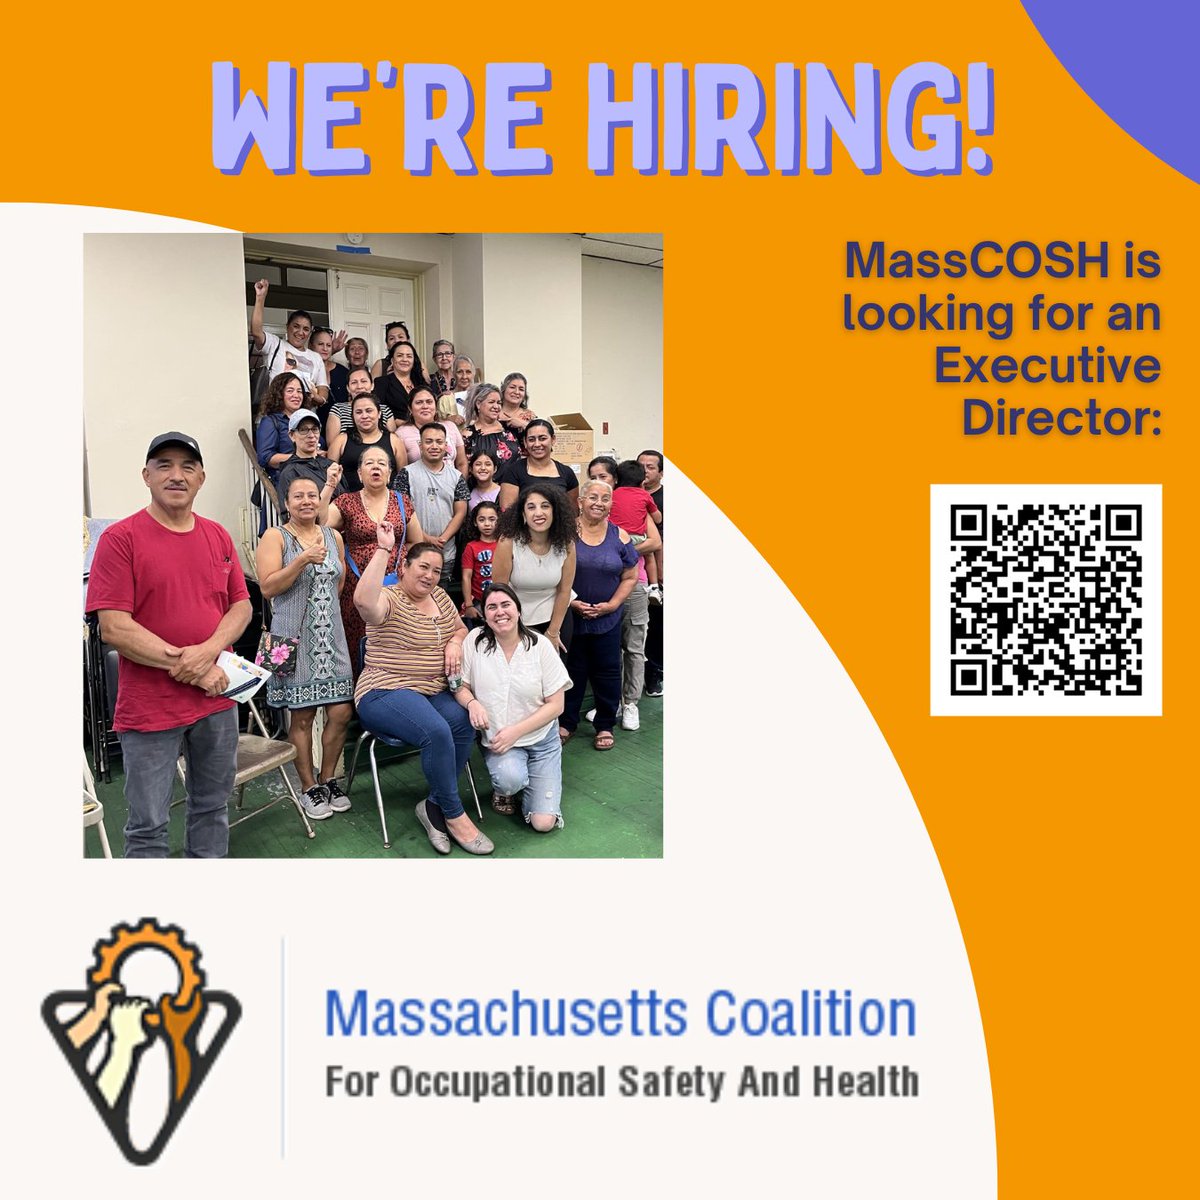 Come join our team! MassCOSH is looking for an Executive Director. For more information on the position and how to apply, please go to: masscosh.org/publications/m…